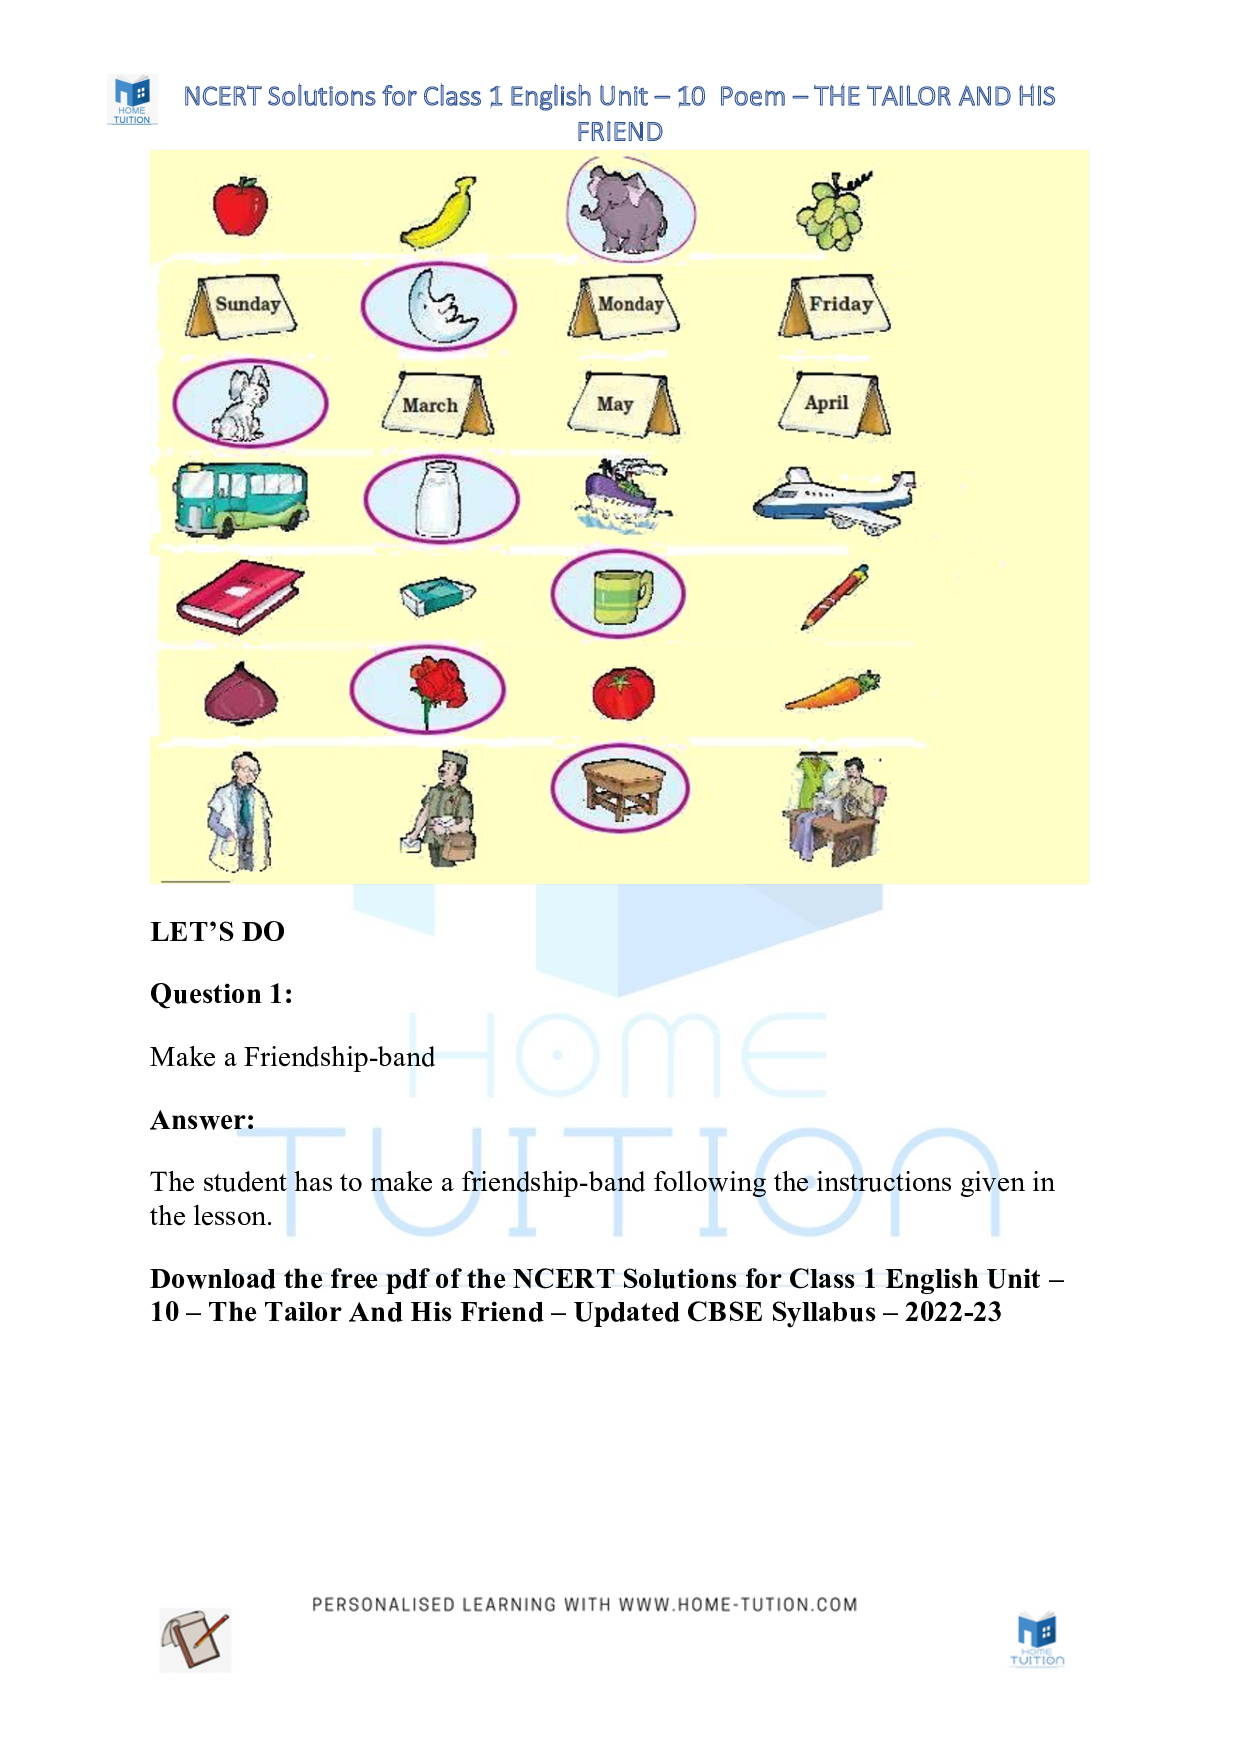 NCERT Solutions for Class 1 English Unit 10 - The Tailor And His Friend